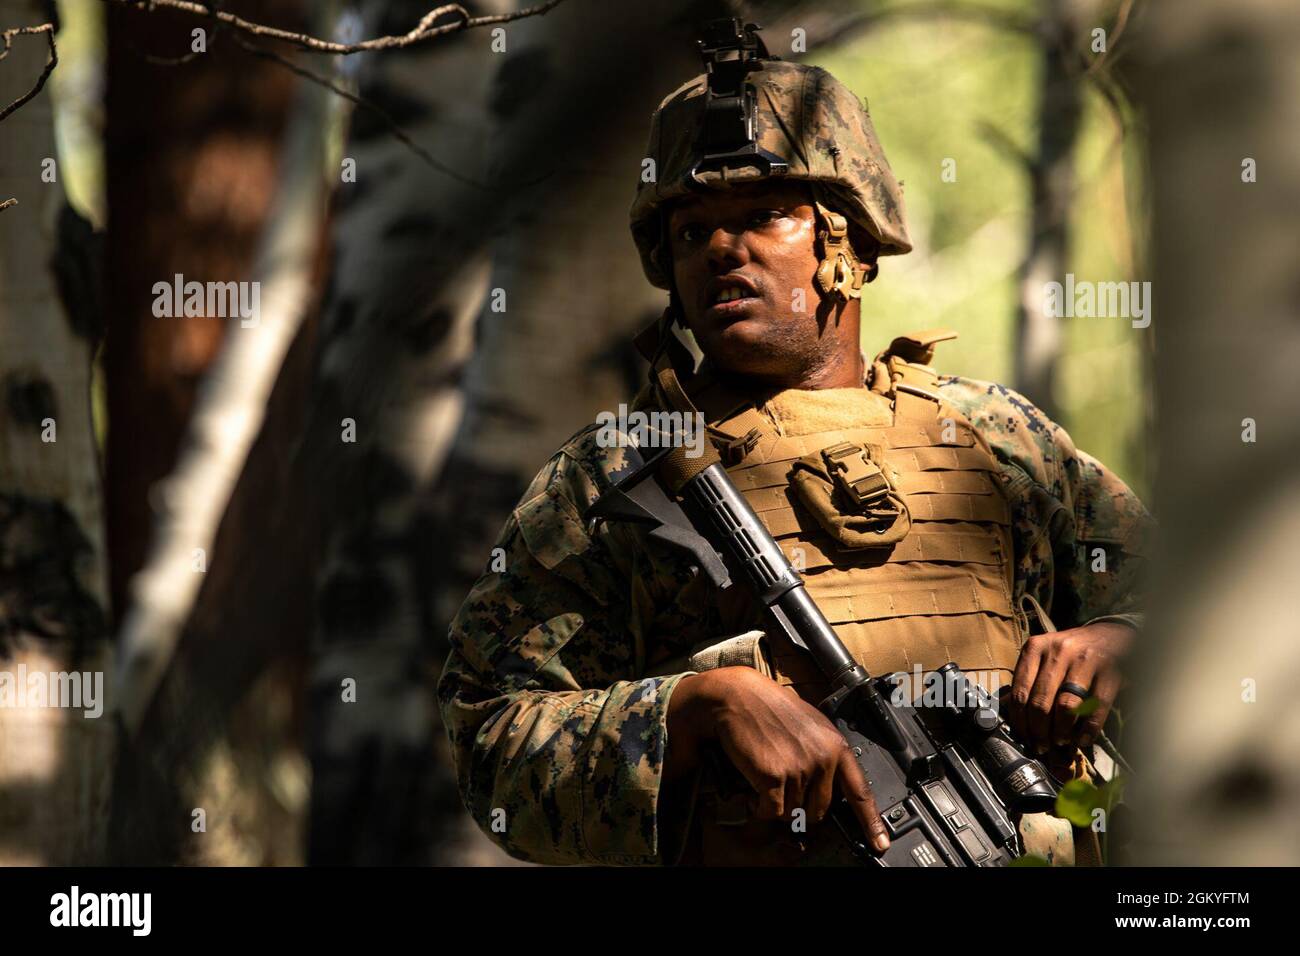 A U.S Marine with the 2nd Battalion, 24th Marine Regiment and 4th Combat Engineer Battalion, 4th Marine Division, provides security in the mountains of  Marine Corps Mountain Warfare Training Center, California on July 28, 2021. Marines with 2nd Battalion, 24th Marine Regiment and 4th Combat Engineer Battalion, 4th Marine Division are participating in a modified mountain training exercise at MCMWTC to prepare them for the challenges of operating in a harsh, mountainous environment many of their adversaries are acclimated to Stock Photo